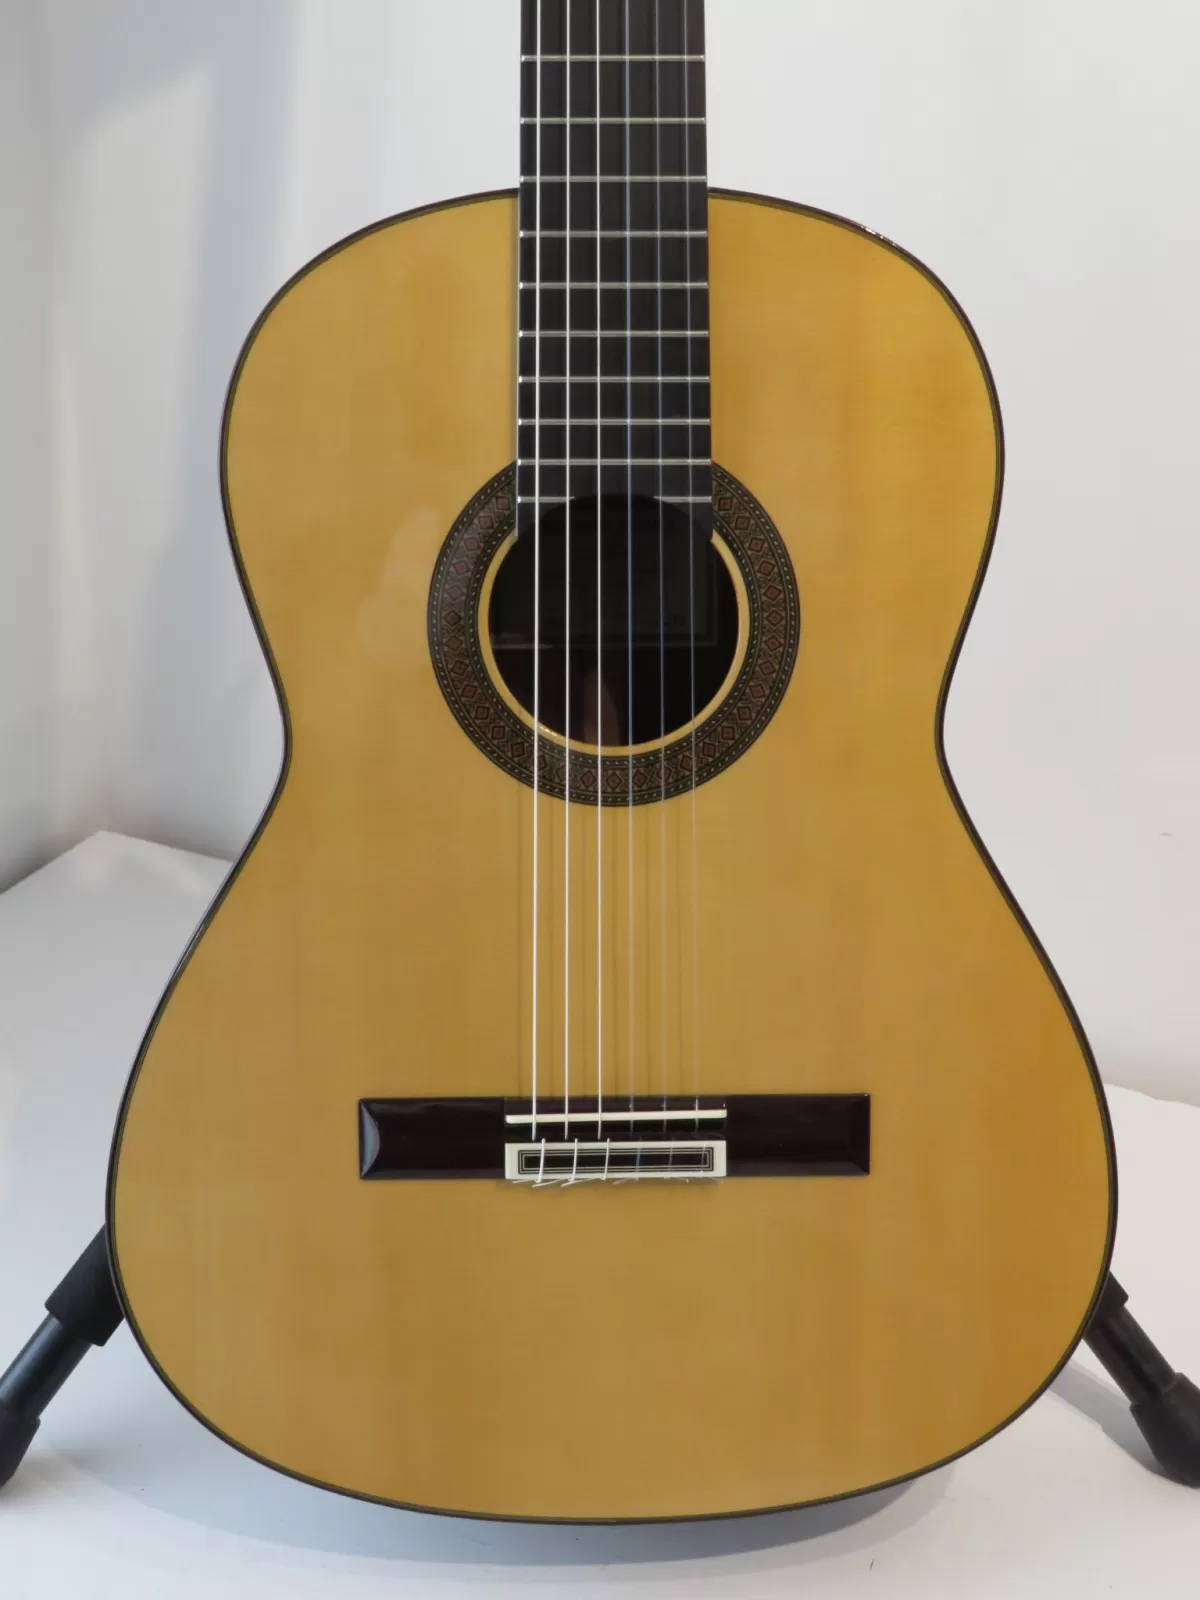 2021 Teodoro Perez Madrid Spruce Top Classical Acoustic Guitar - Stunning!